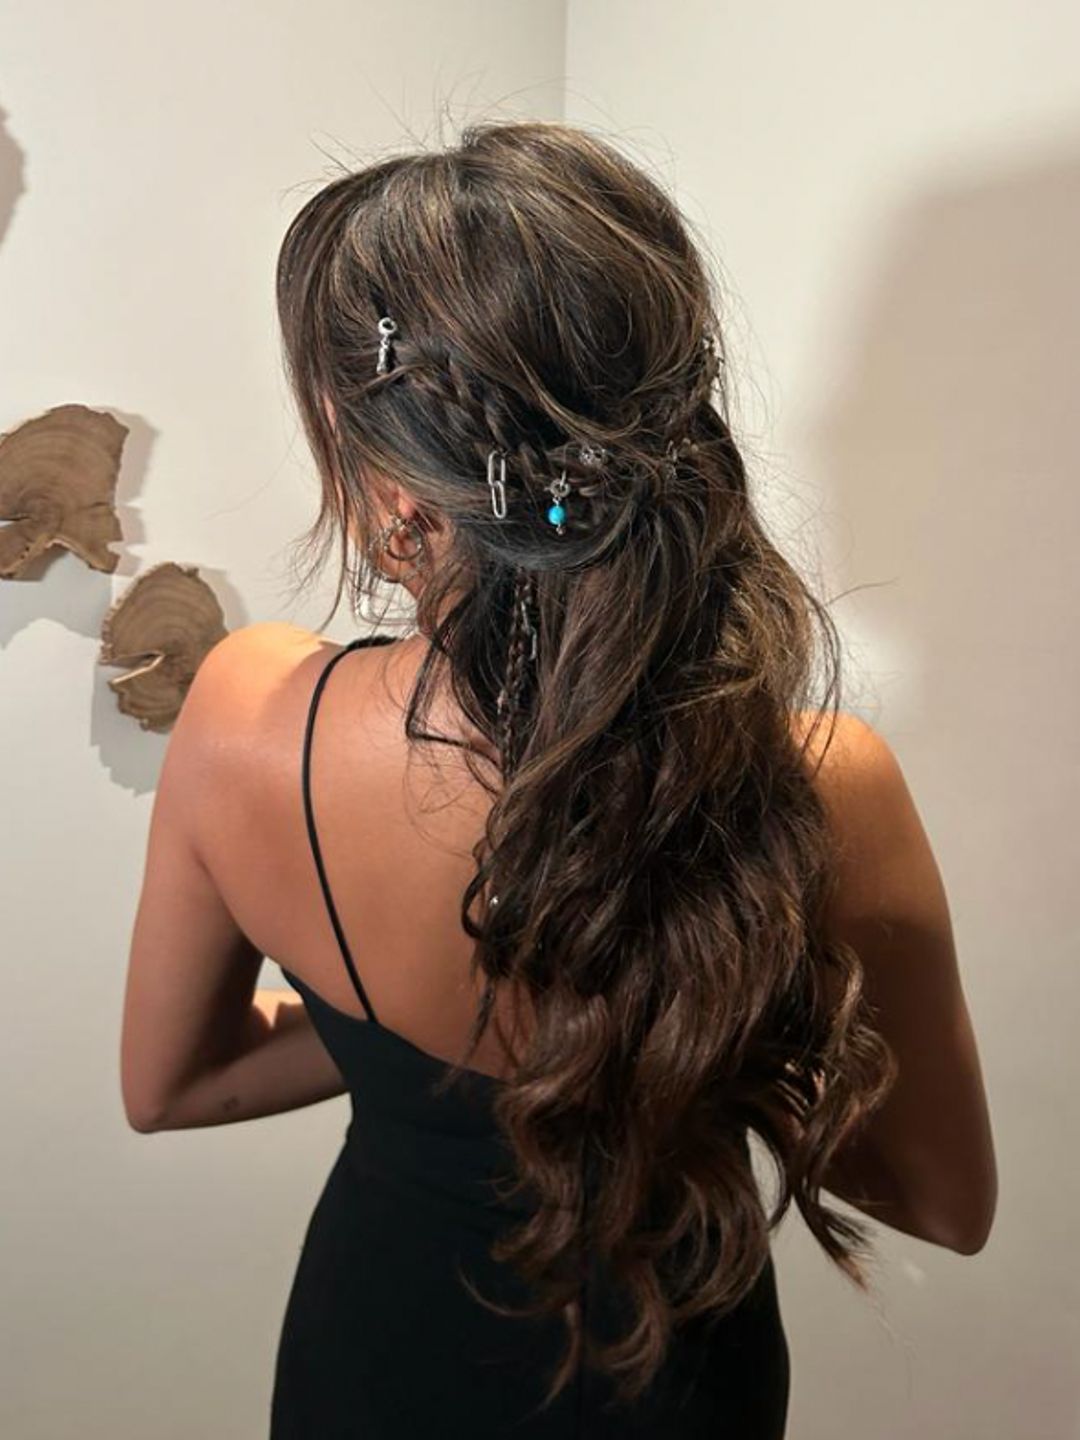 Ashley Park's hair, adorned with Pandora charms 